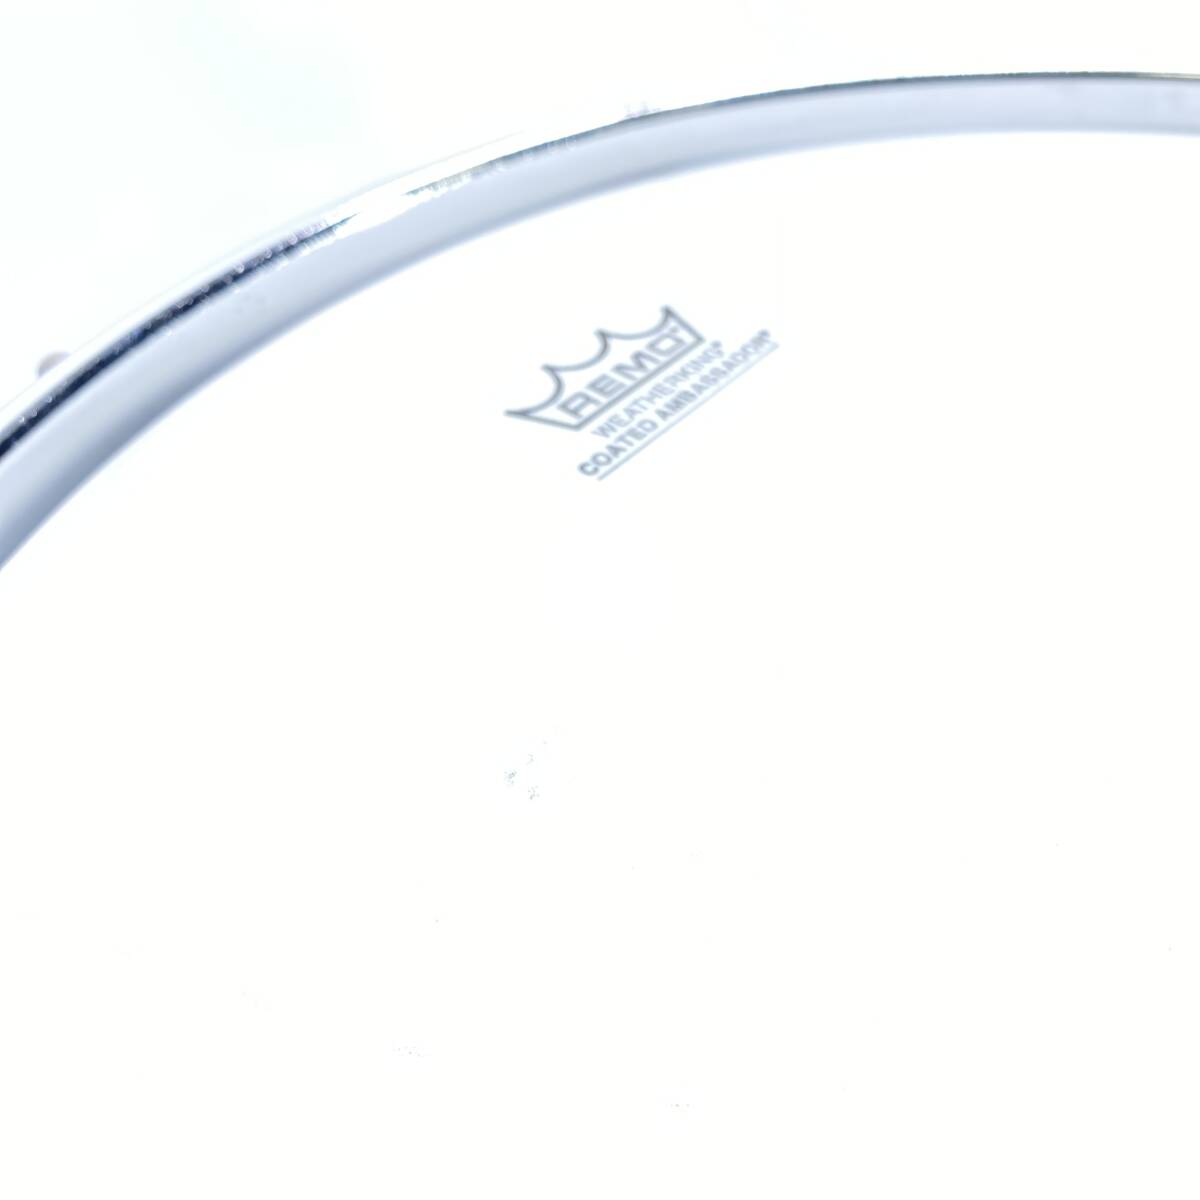 1 jpy ~ 2T30150424 Pearl pearl snare drum Custom Alloy SensiTone Elite silencing pad attaching present condition goods 